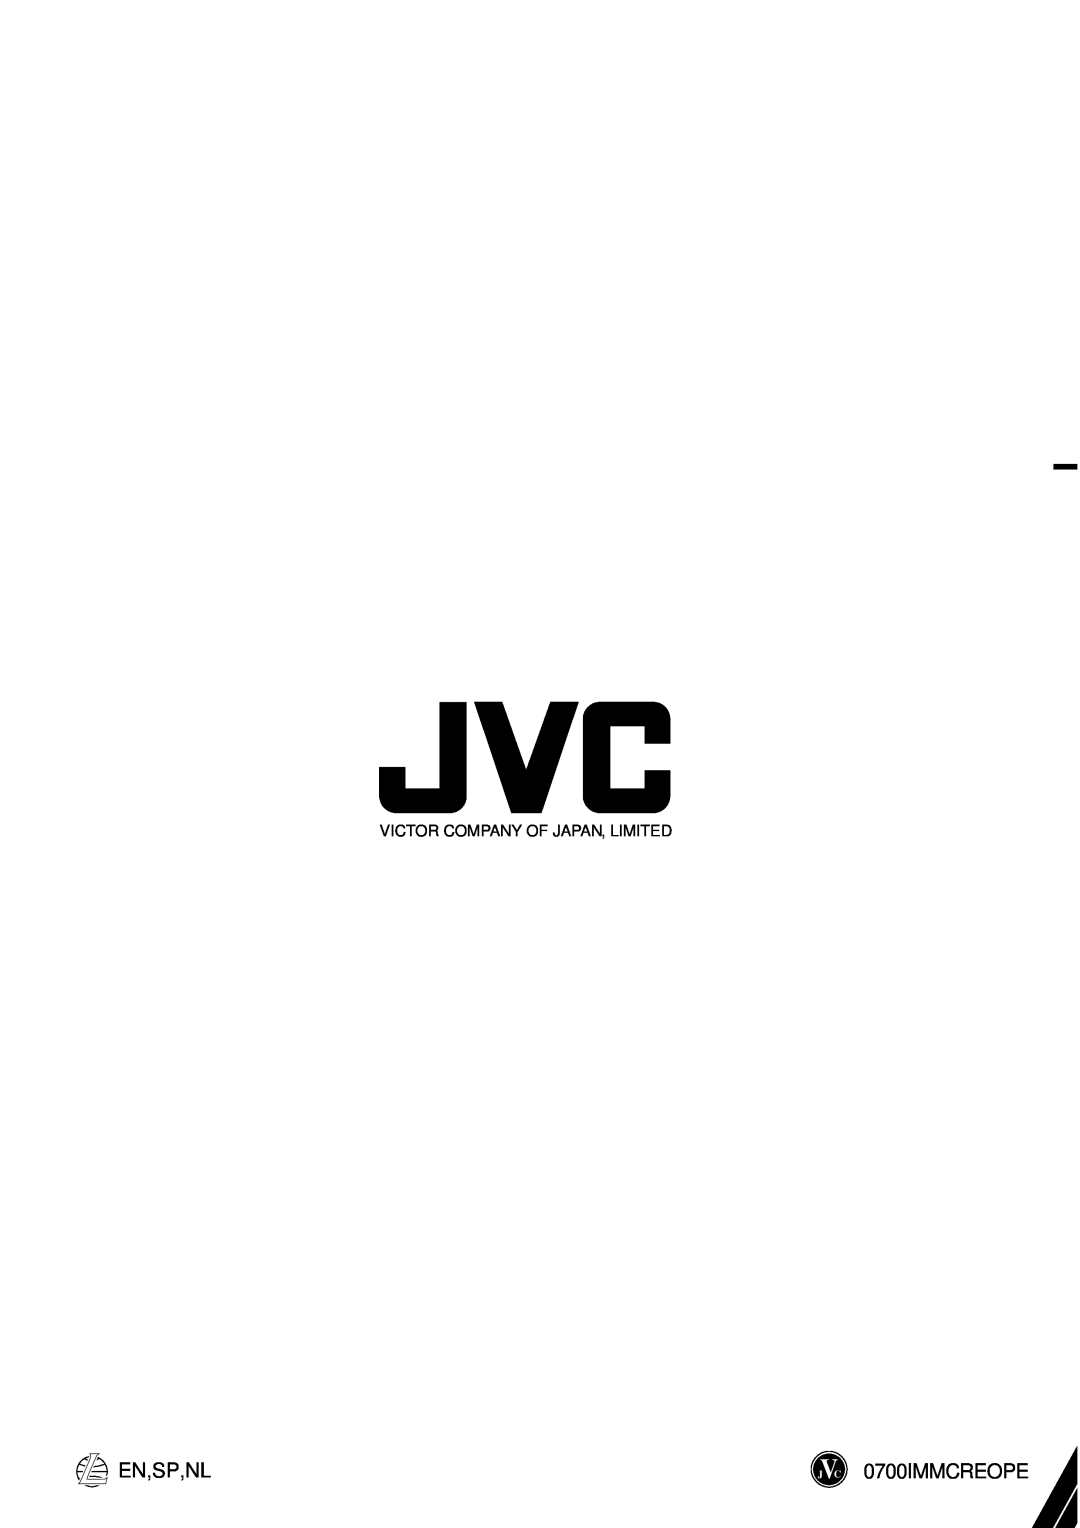 JVC XL-PV310, XL-PG31, XL-PG51 operating instructions En,Sp,Nl, 0700IMMCREOPE, Victor Company Of Japan, Limited 